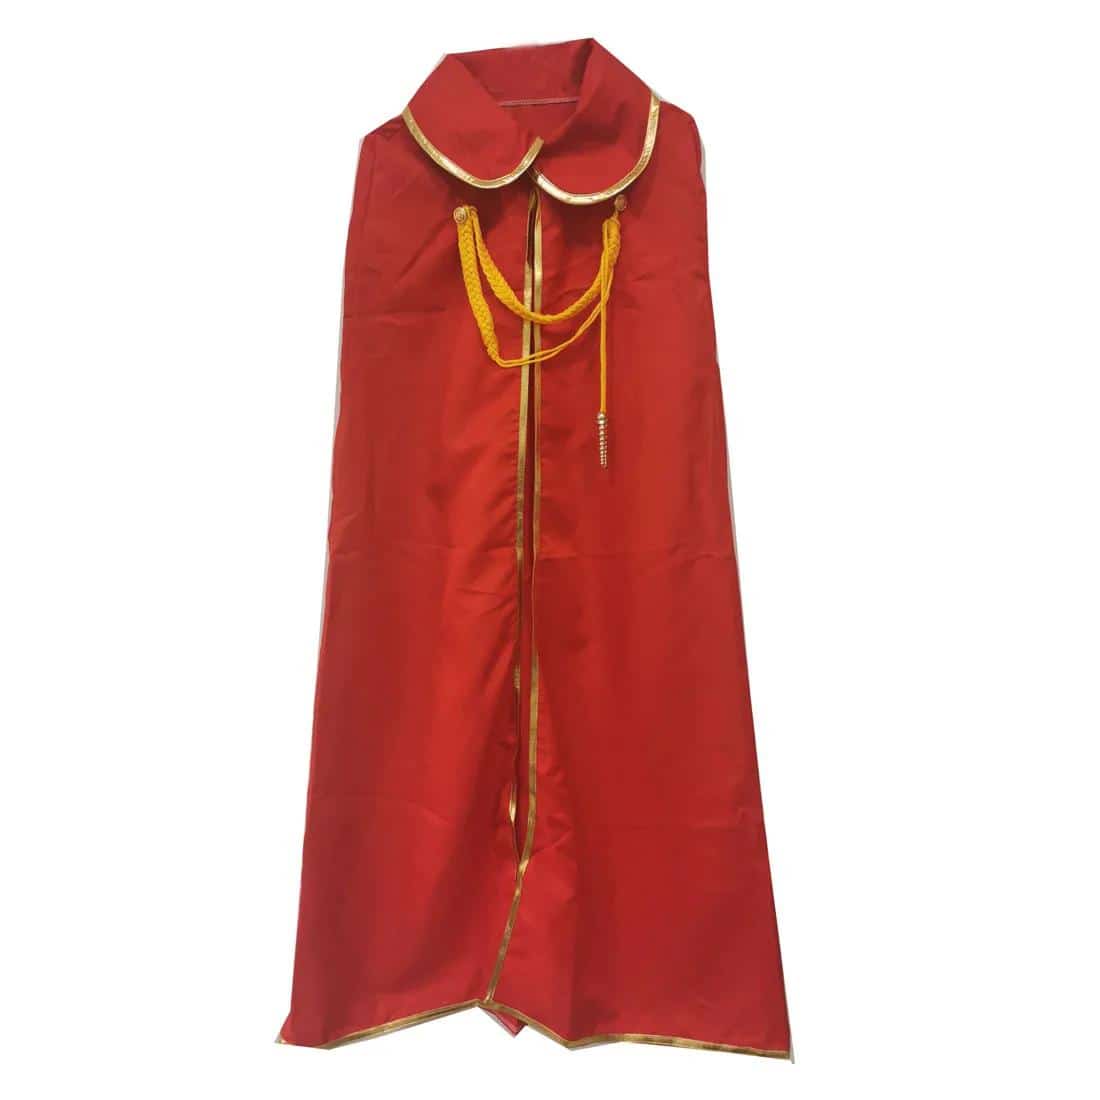 2021 Anime Noragami Yato Cosplay Red Cape Cloak costumes Custom-made Any Sizes 1